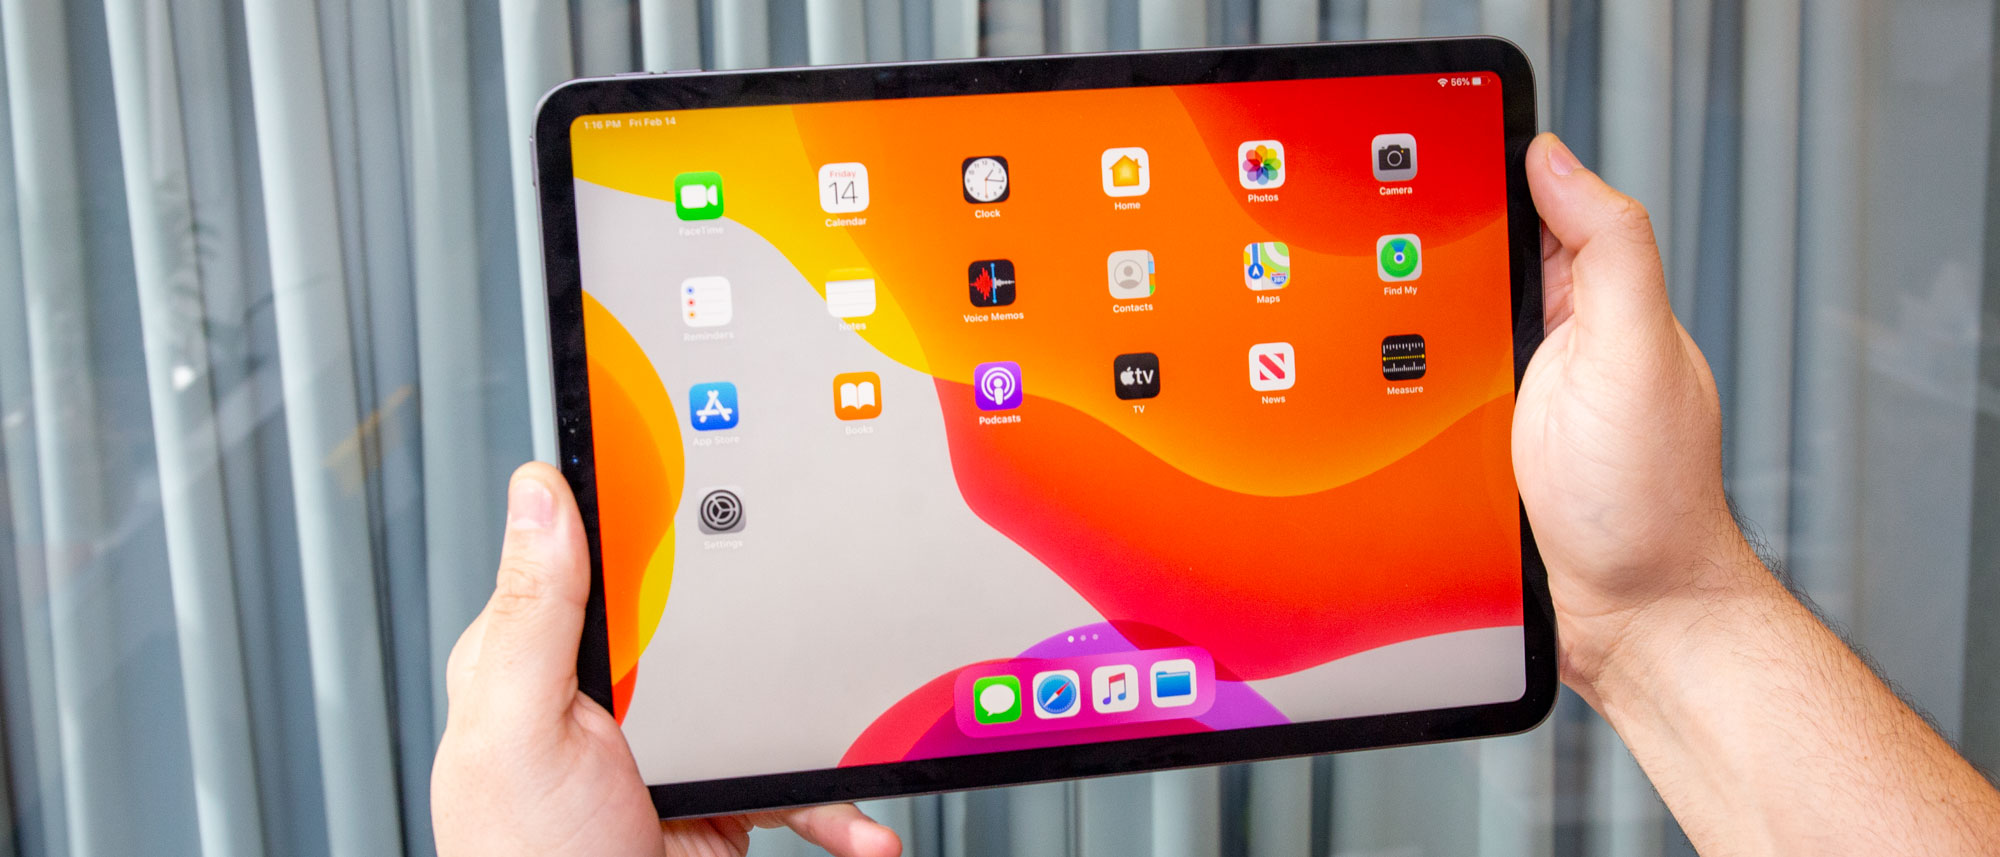 How to reset an iPad: Factory restore, soft reset and force